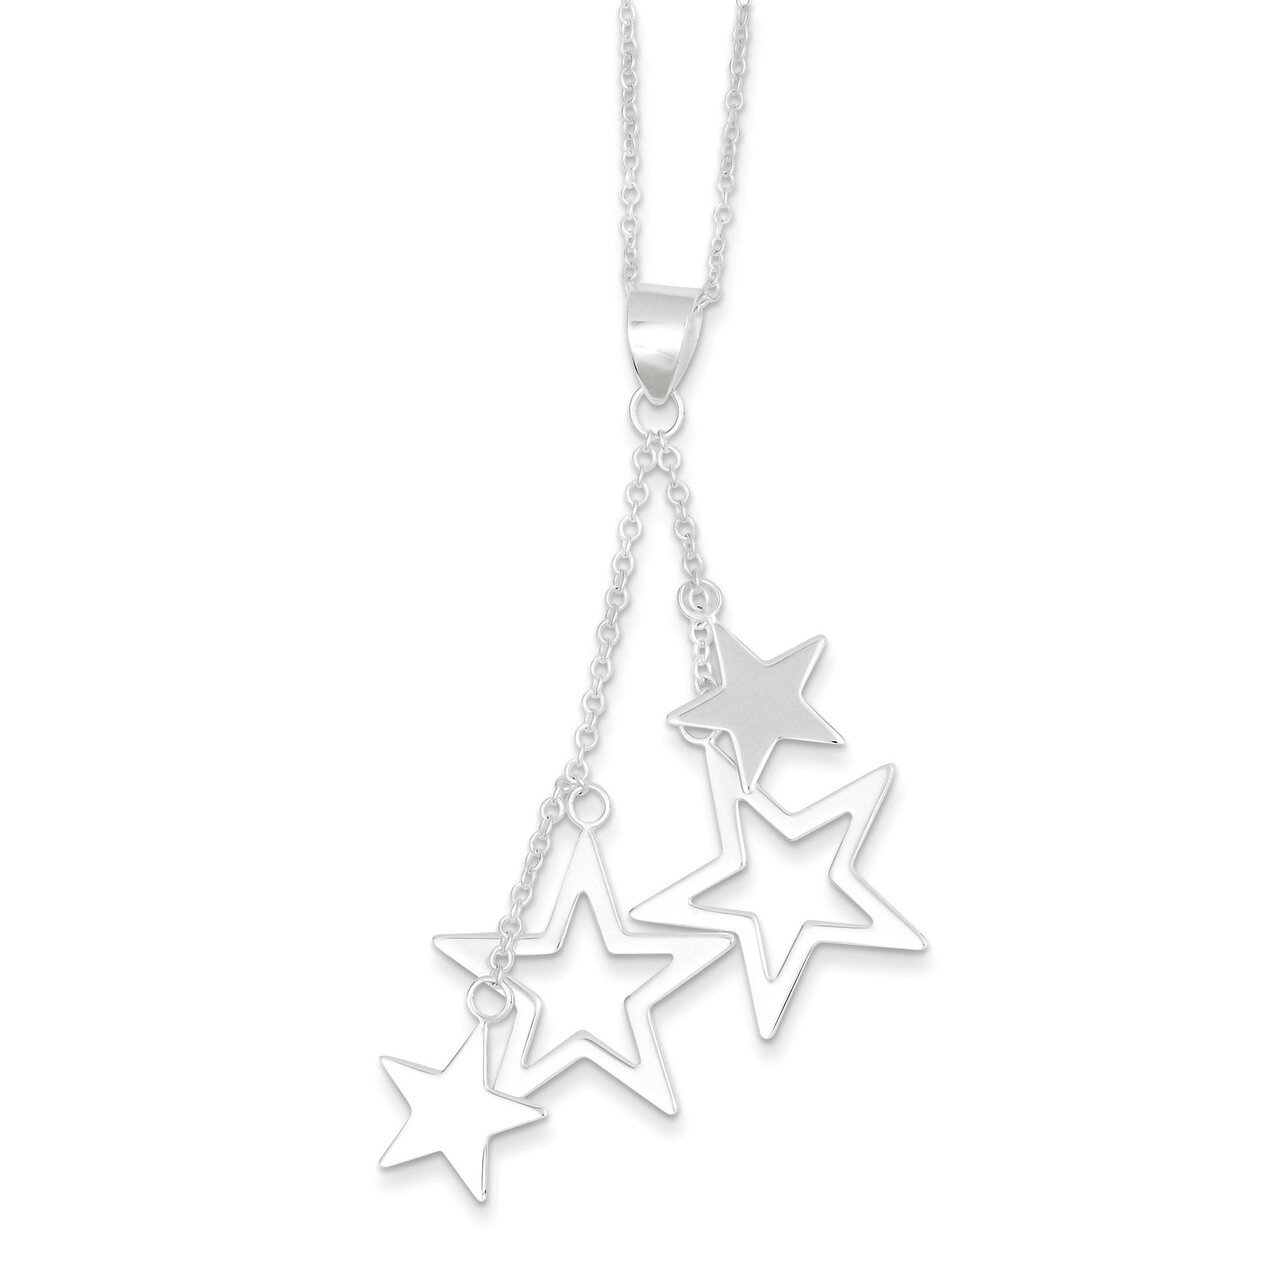 Dangling Stars Necklace Sterling Silver QG2611-18